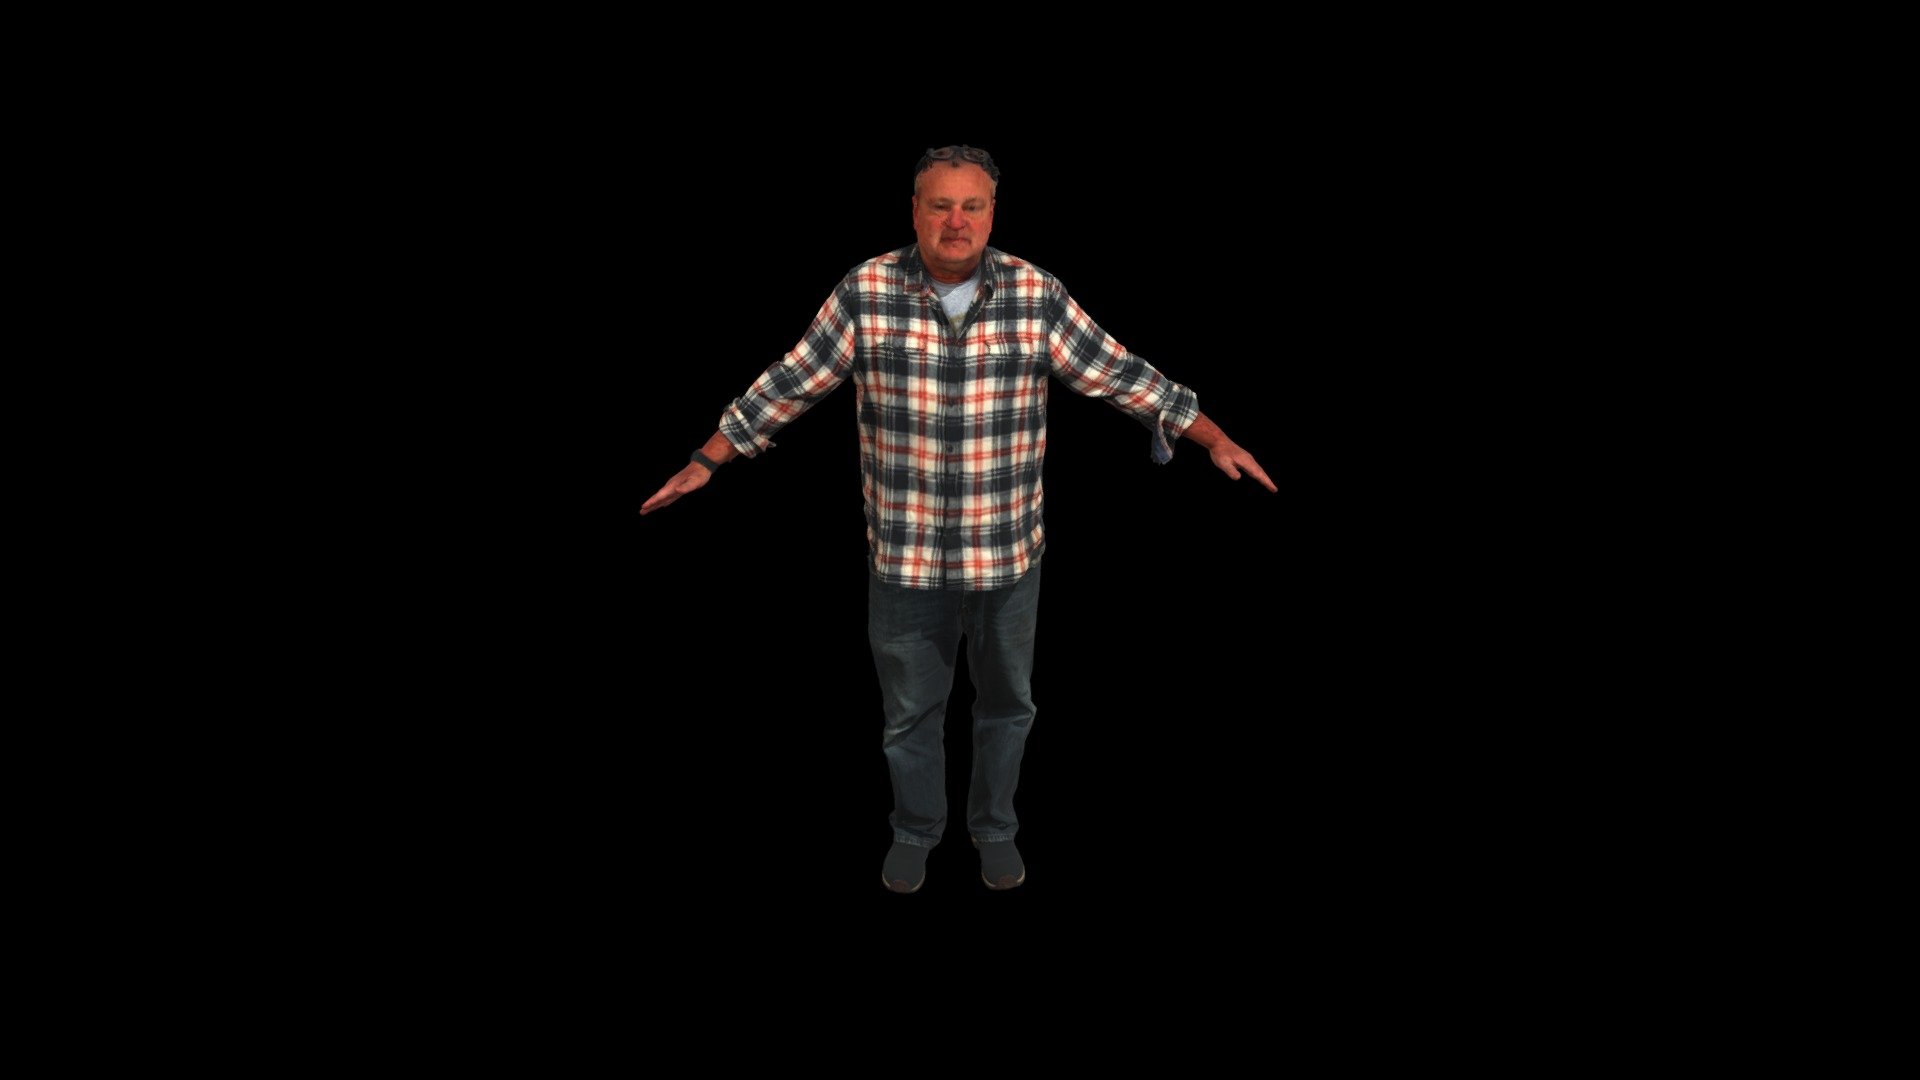 My homie Paul looking mad unhoused chic

Scanned adult man 

Age 65

generally angry looking fellow

works at a garage and smokes cigarettes for lunch - Paul Body Scan - 3D model by kevjumba (@kevinmullin99) 3d model